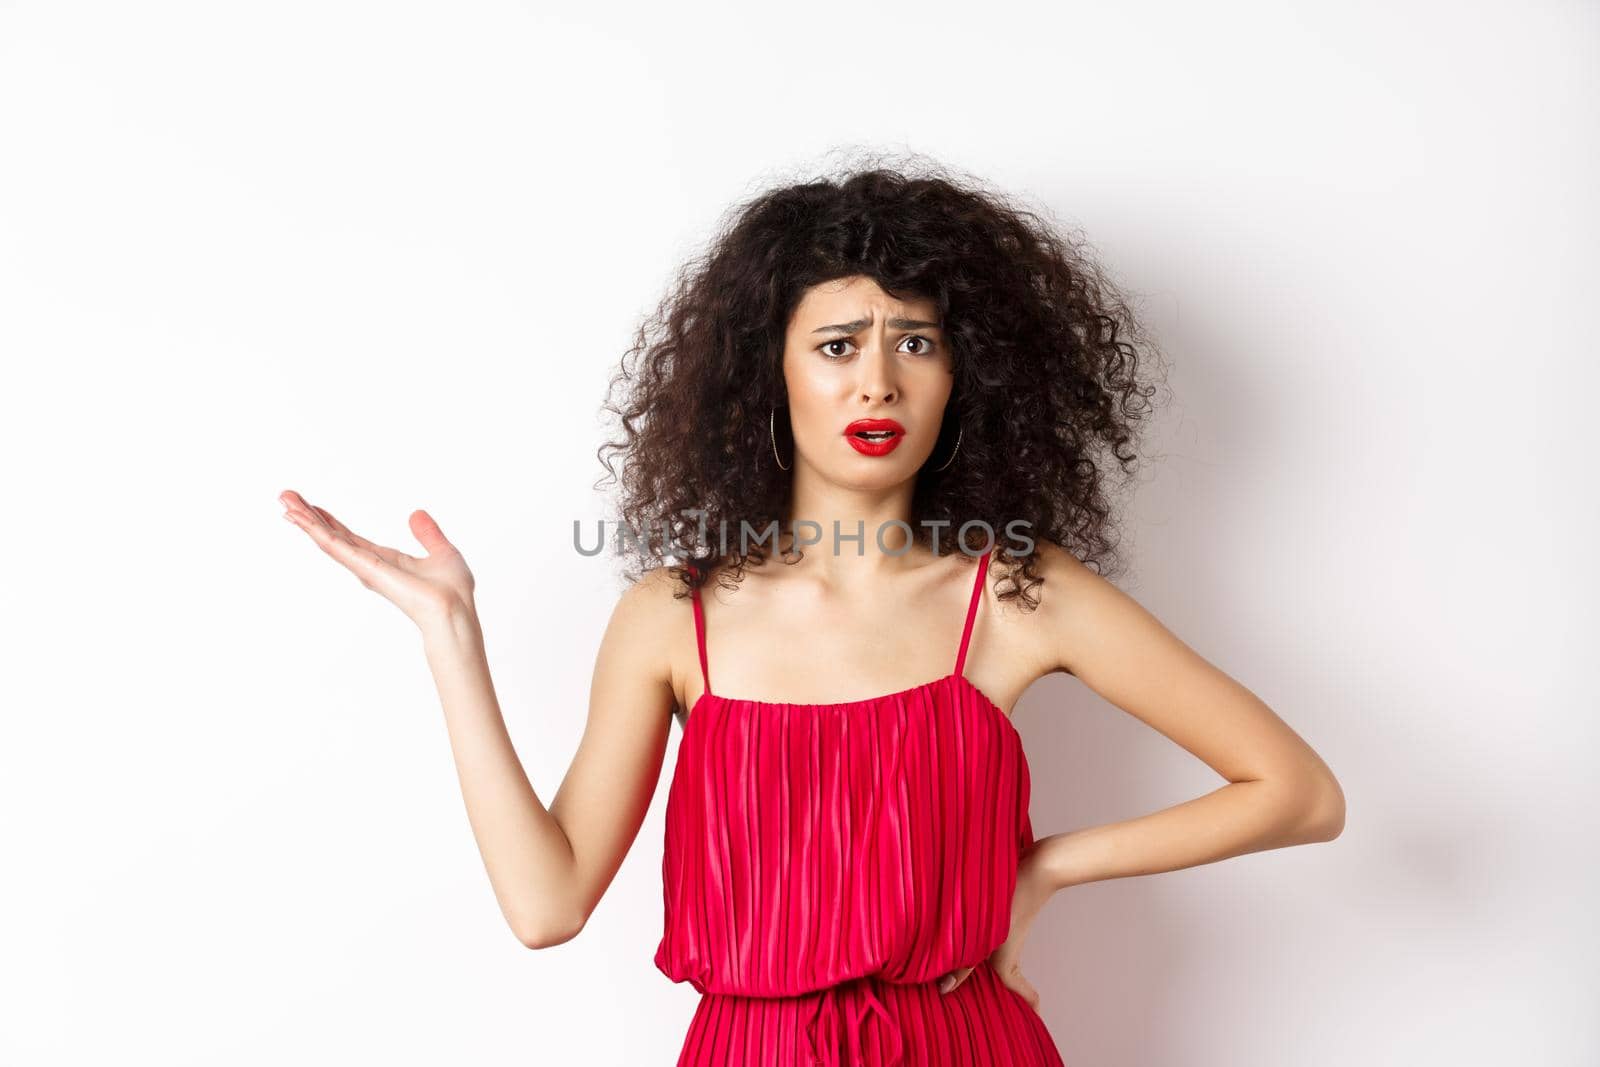 Upset pretty woman with curly hair and red dress, raising hand and look confused, frowning disappointed, talk about unfair things, standing against white background.